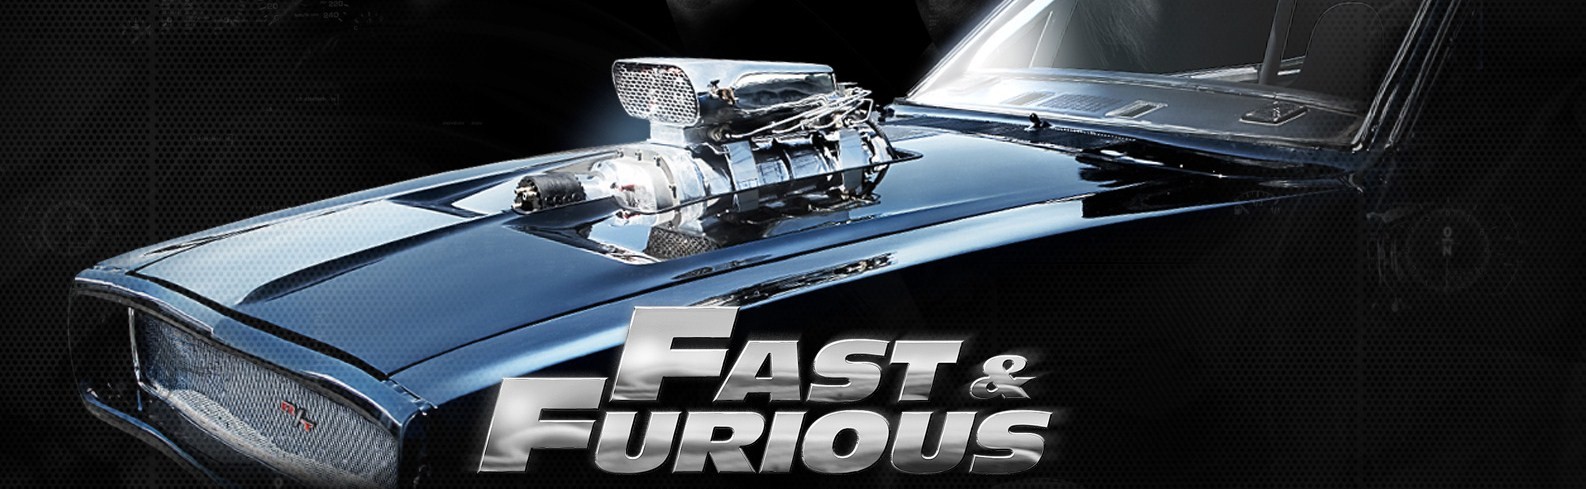 fast and furious wallpaper. vin diesel fast and furious